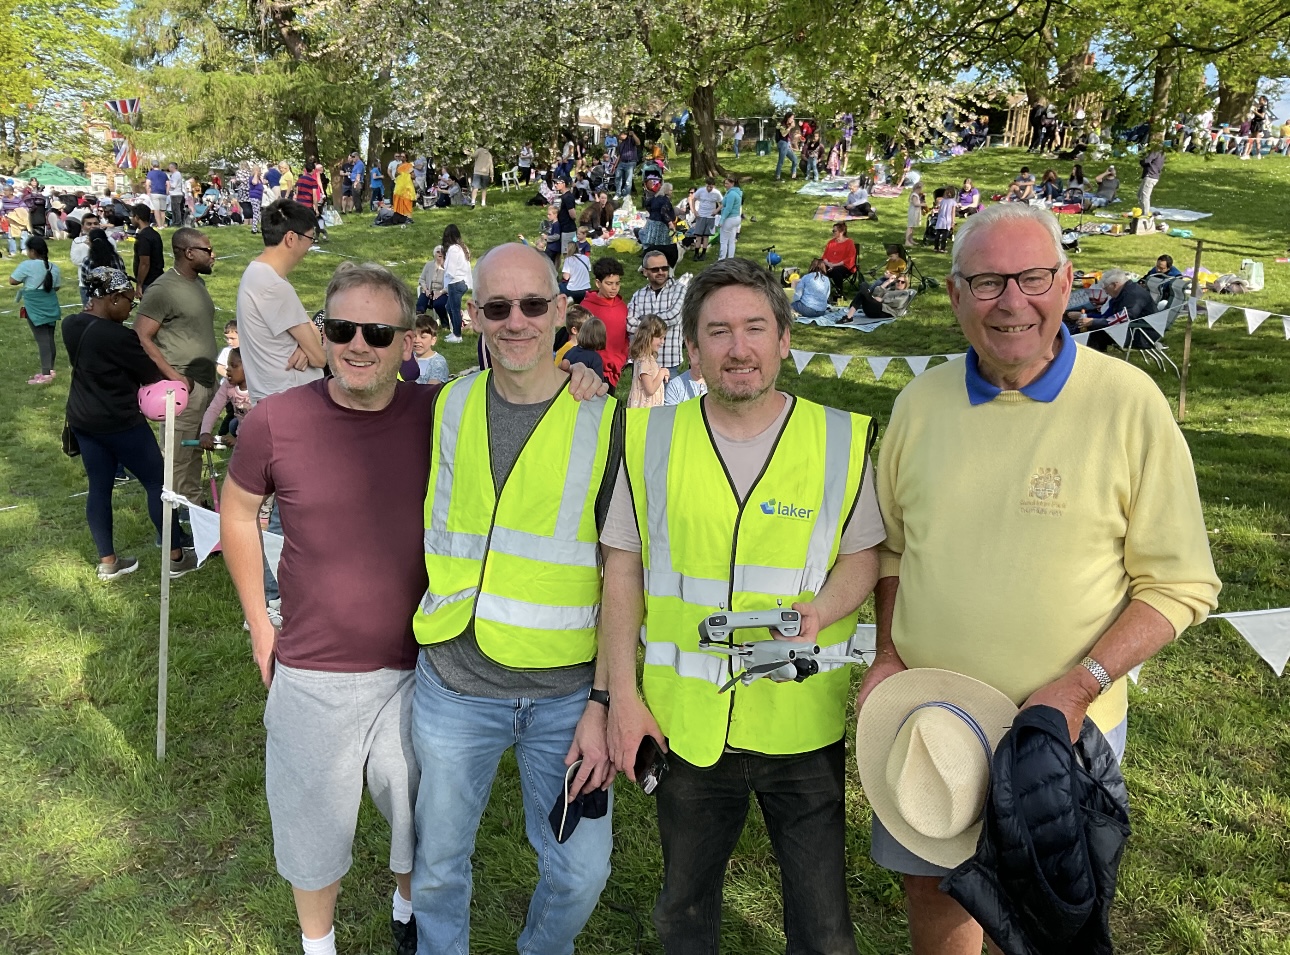 Members of the resident association organising committee Nick Baker (Secretary) Brian Bates (Vice Chair) Stephen Sangster (Chairman) and David Horder who set up the resident group 49 years ago